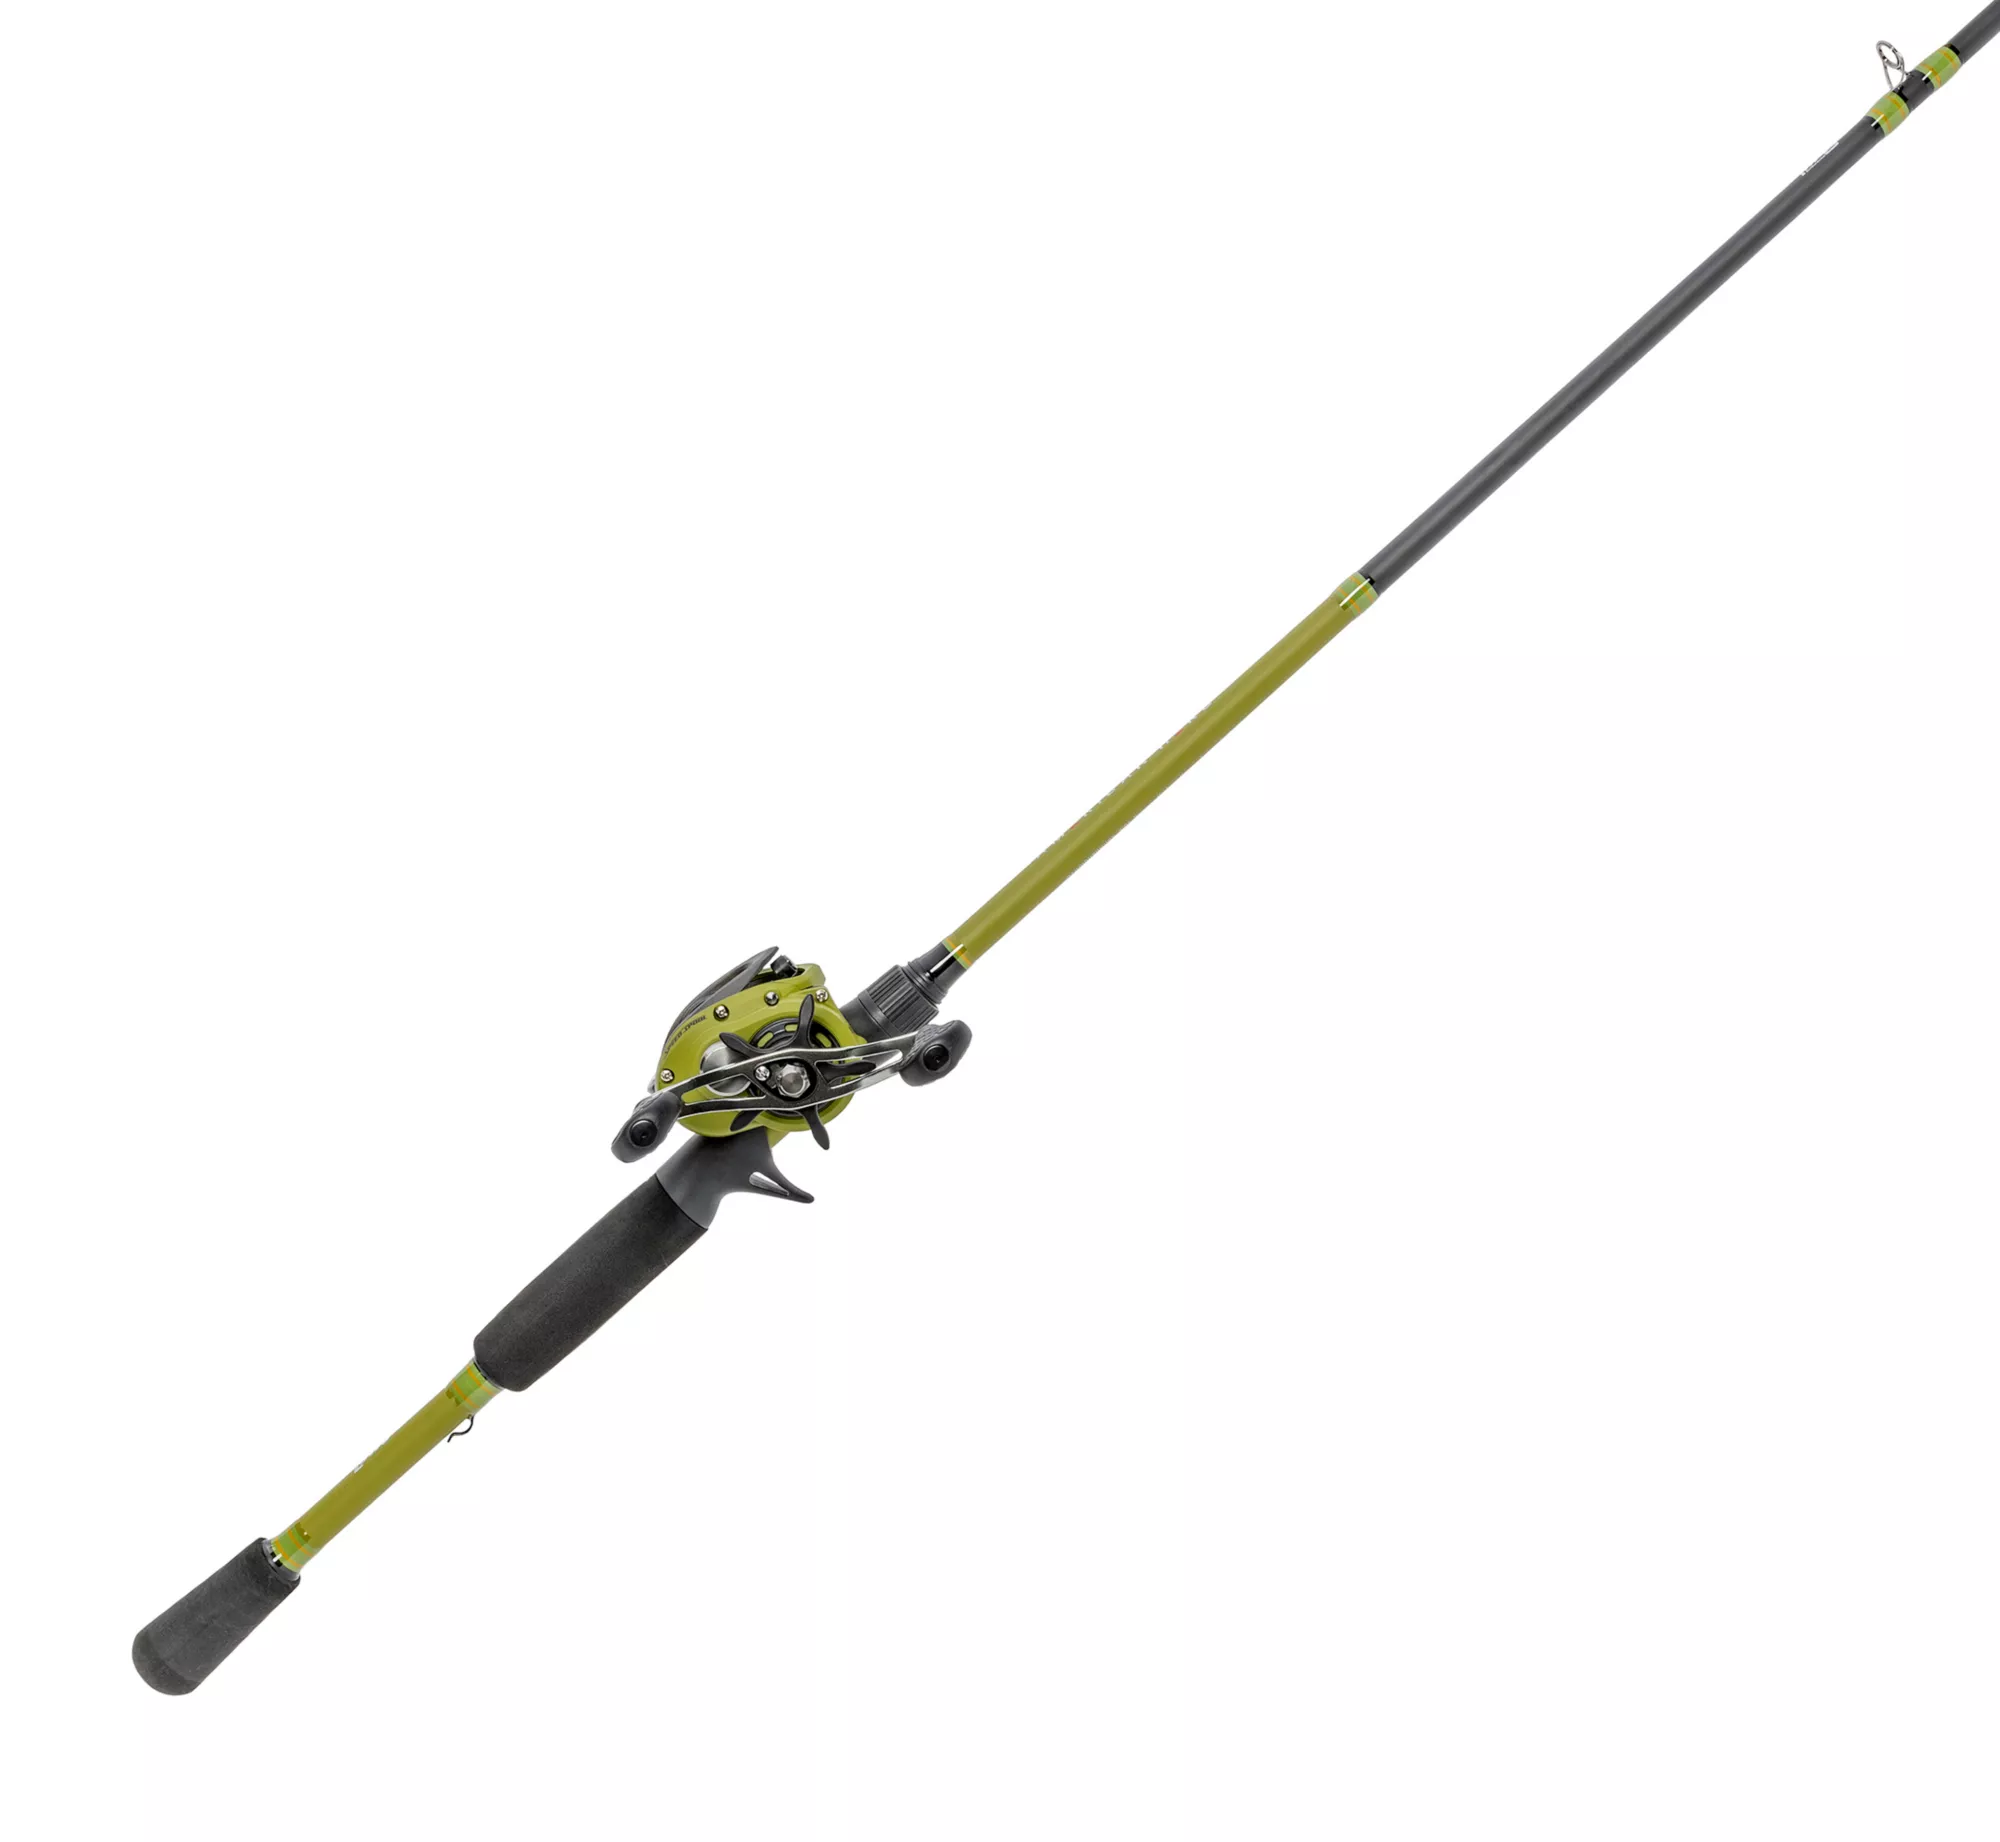 Angler-Approved: Your Complete Guide to Fishing Rods